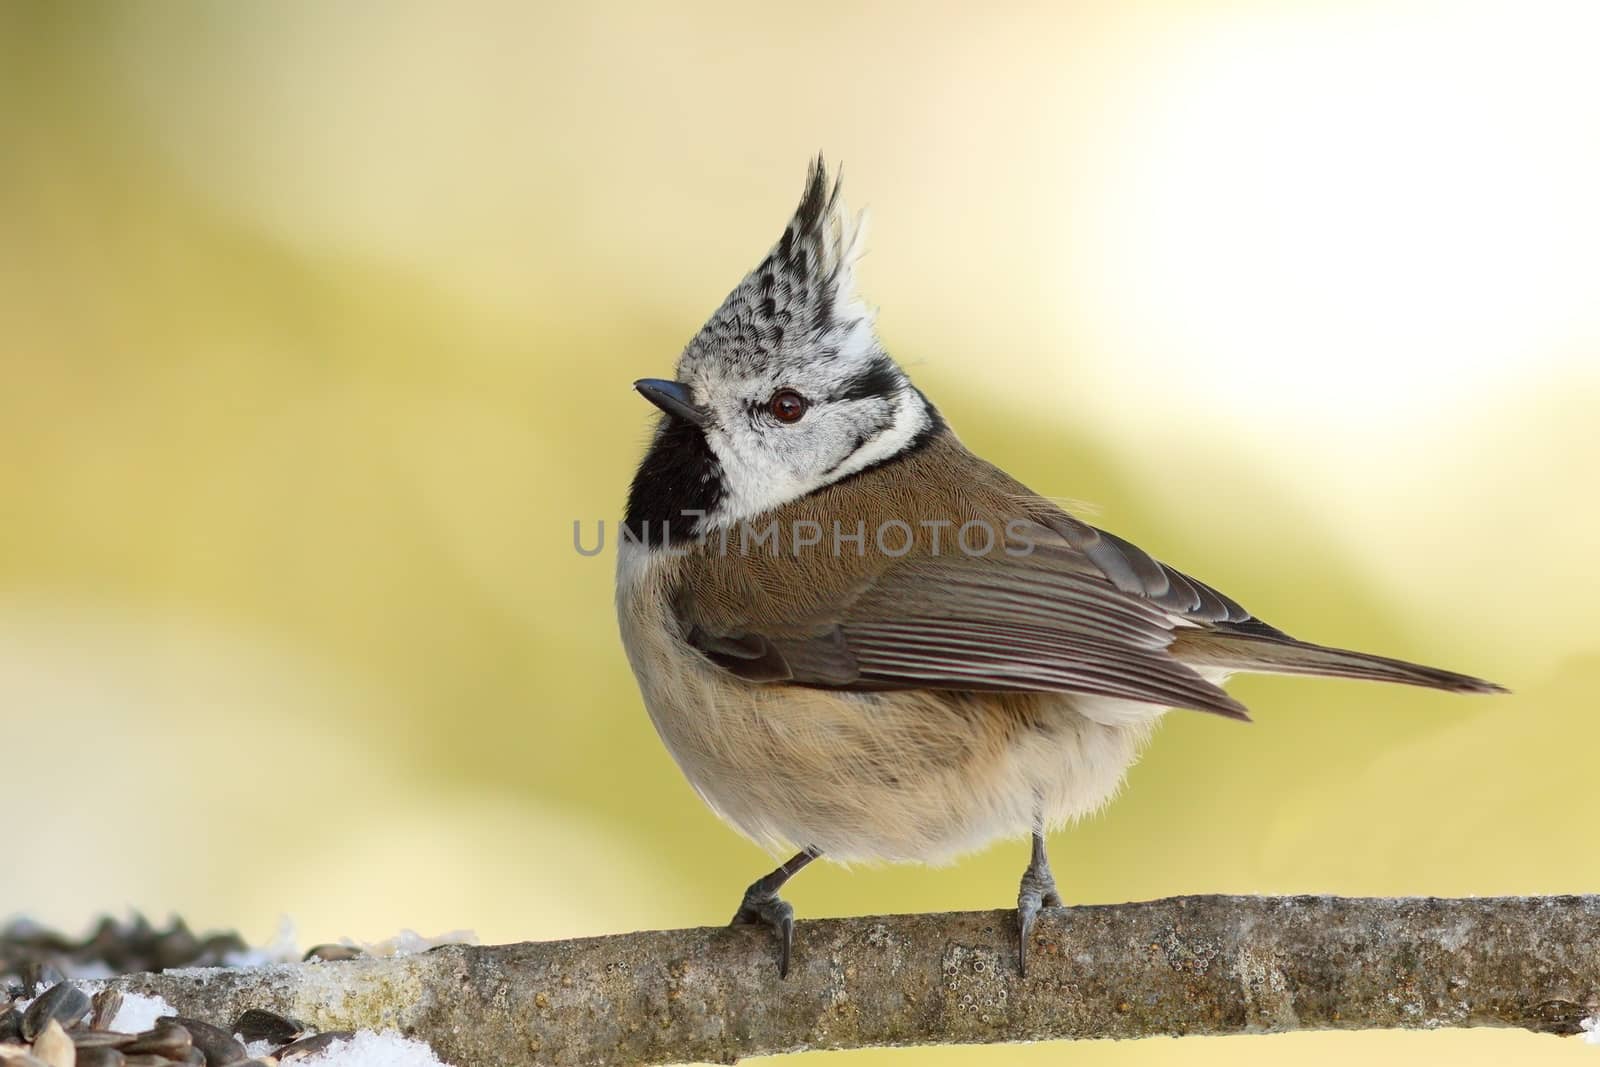 Lophophanes cristatus, the cute european crested tit, perched on twig